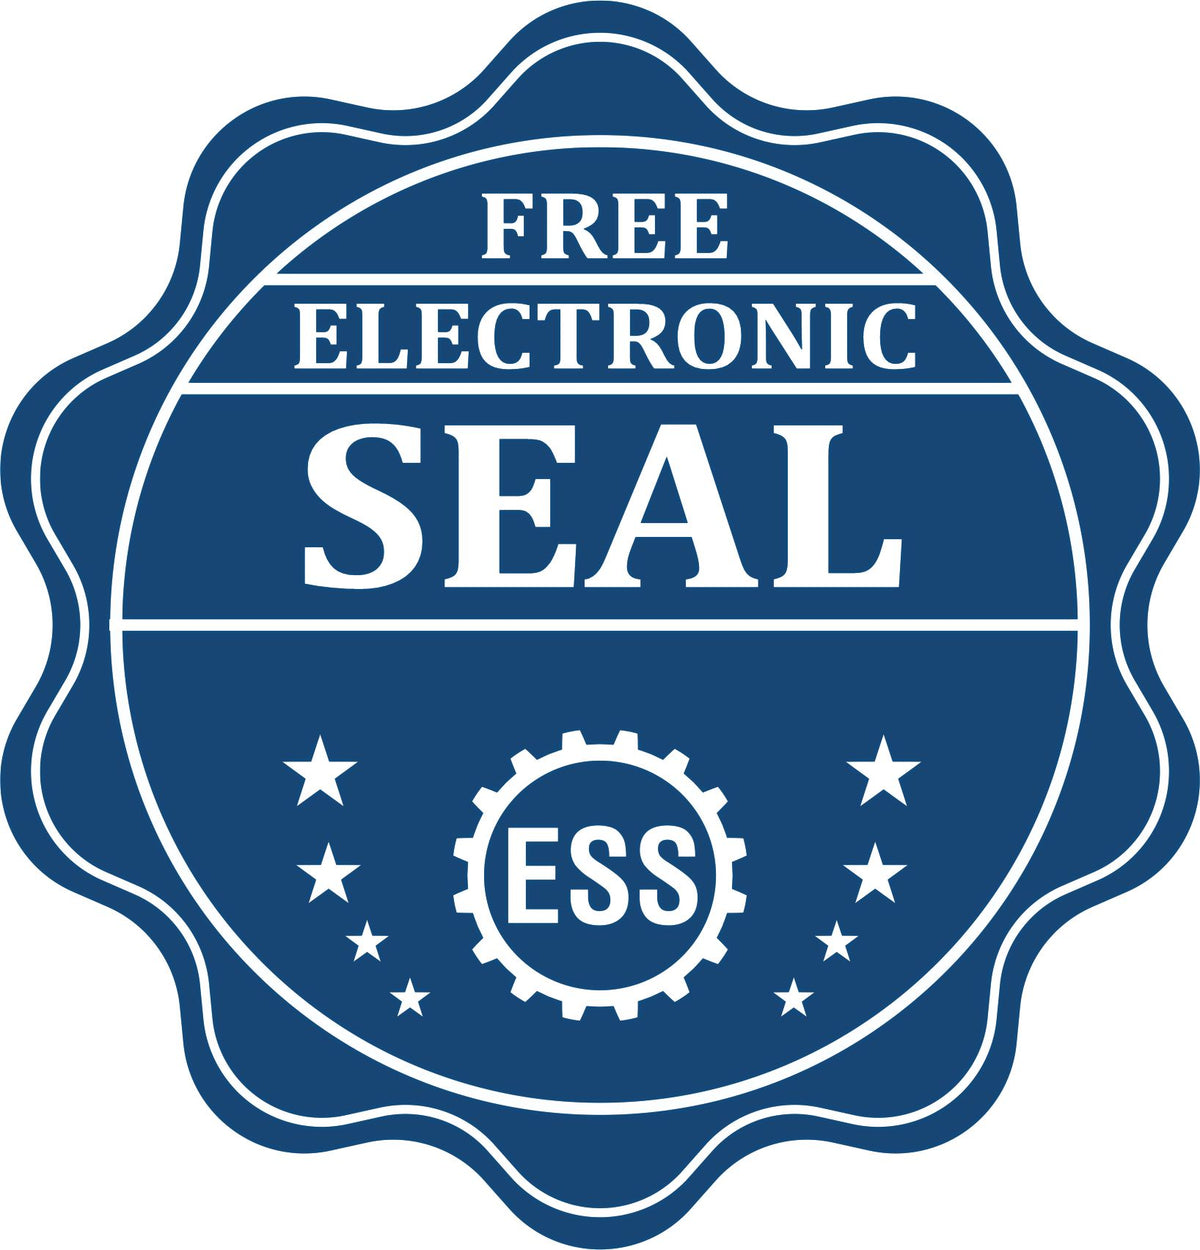 A badge showing a free electronic seal for the Long Reach North Dakota Geology Seal with stars and the ESS gear on the emblem.